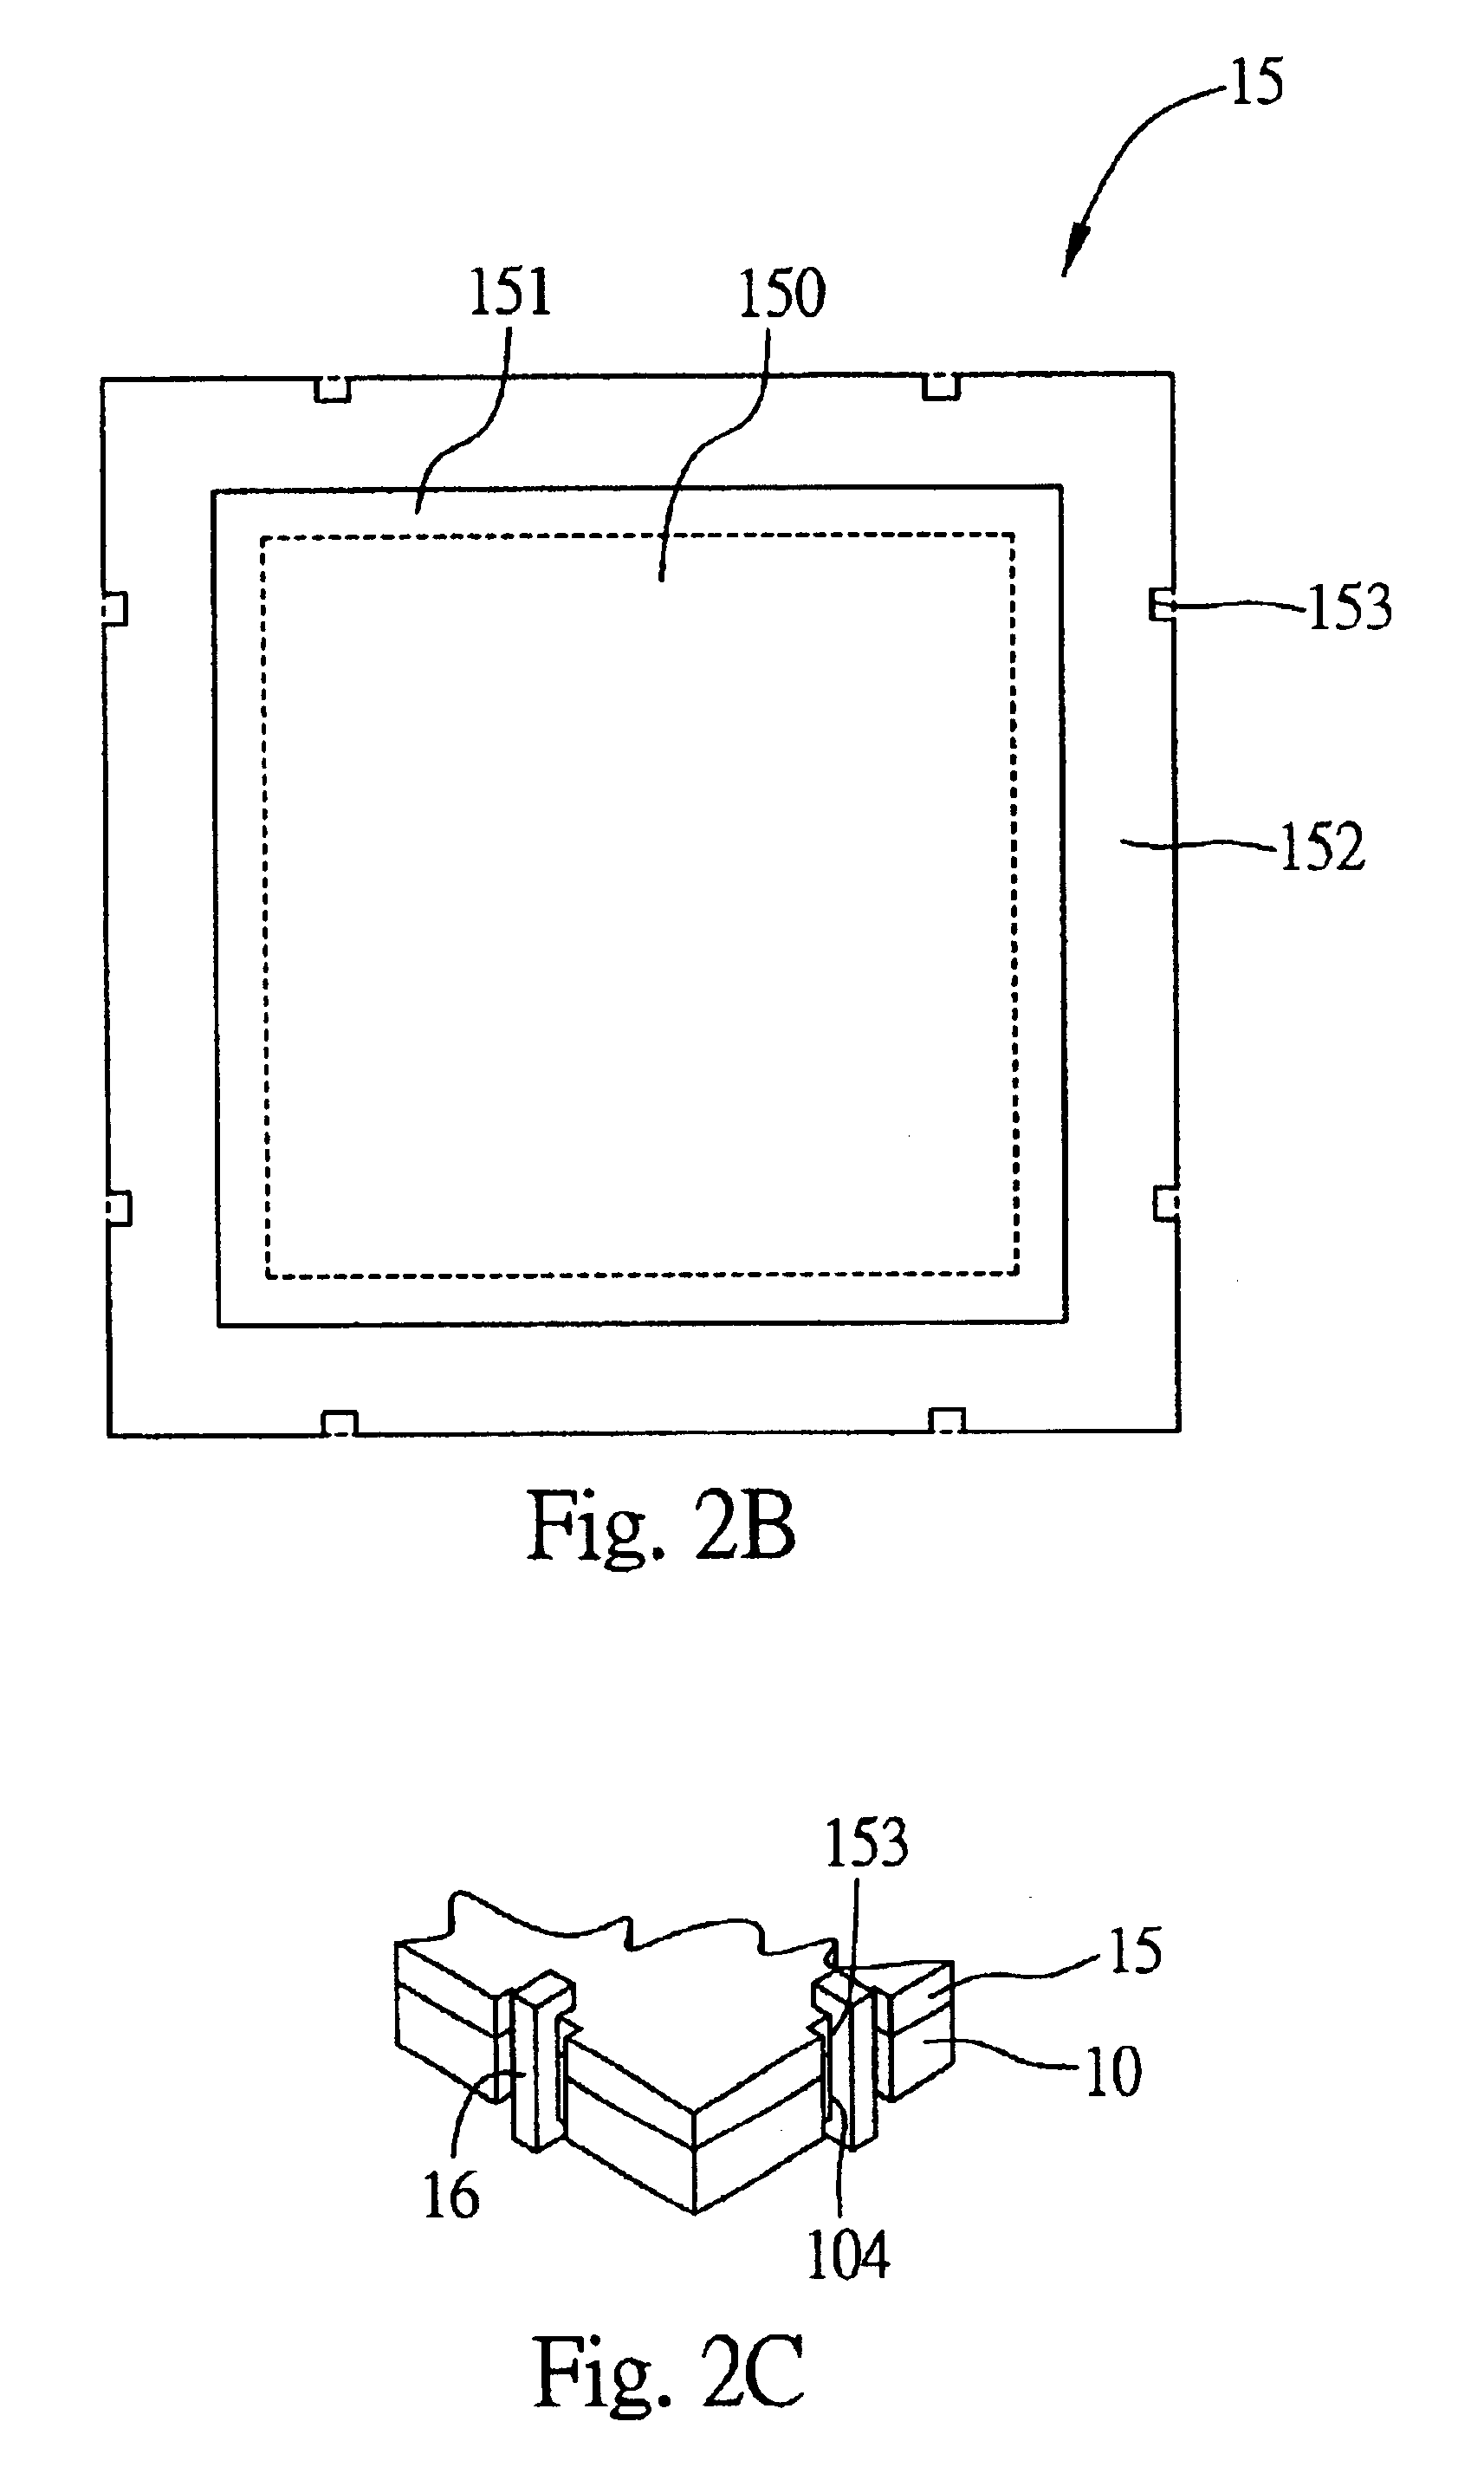 Semiconductor package with heat sink attached to substrate